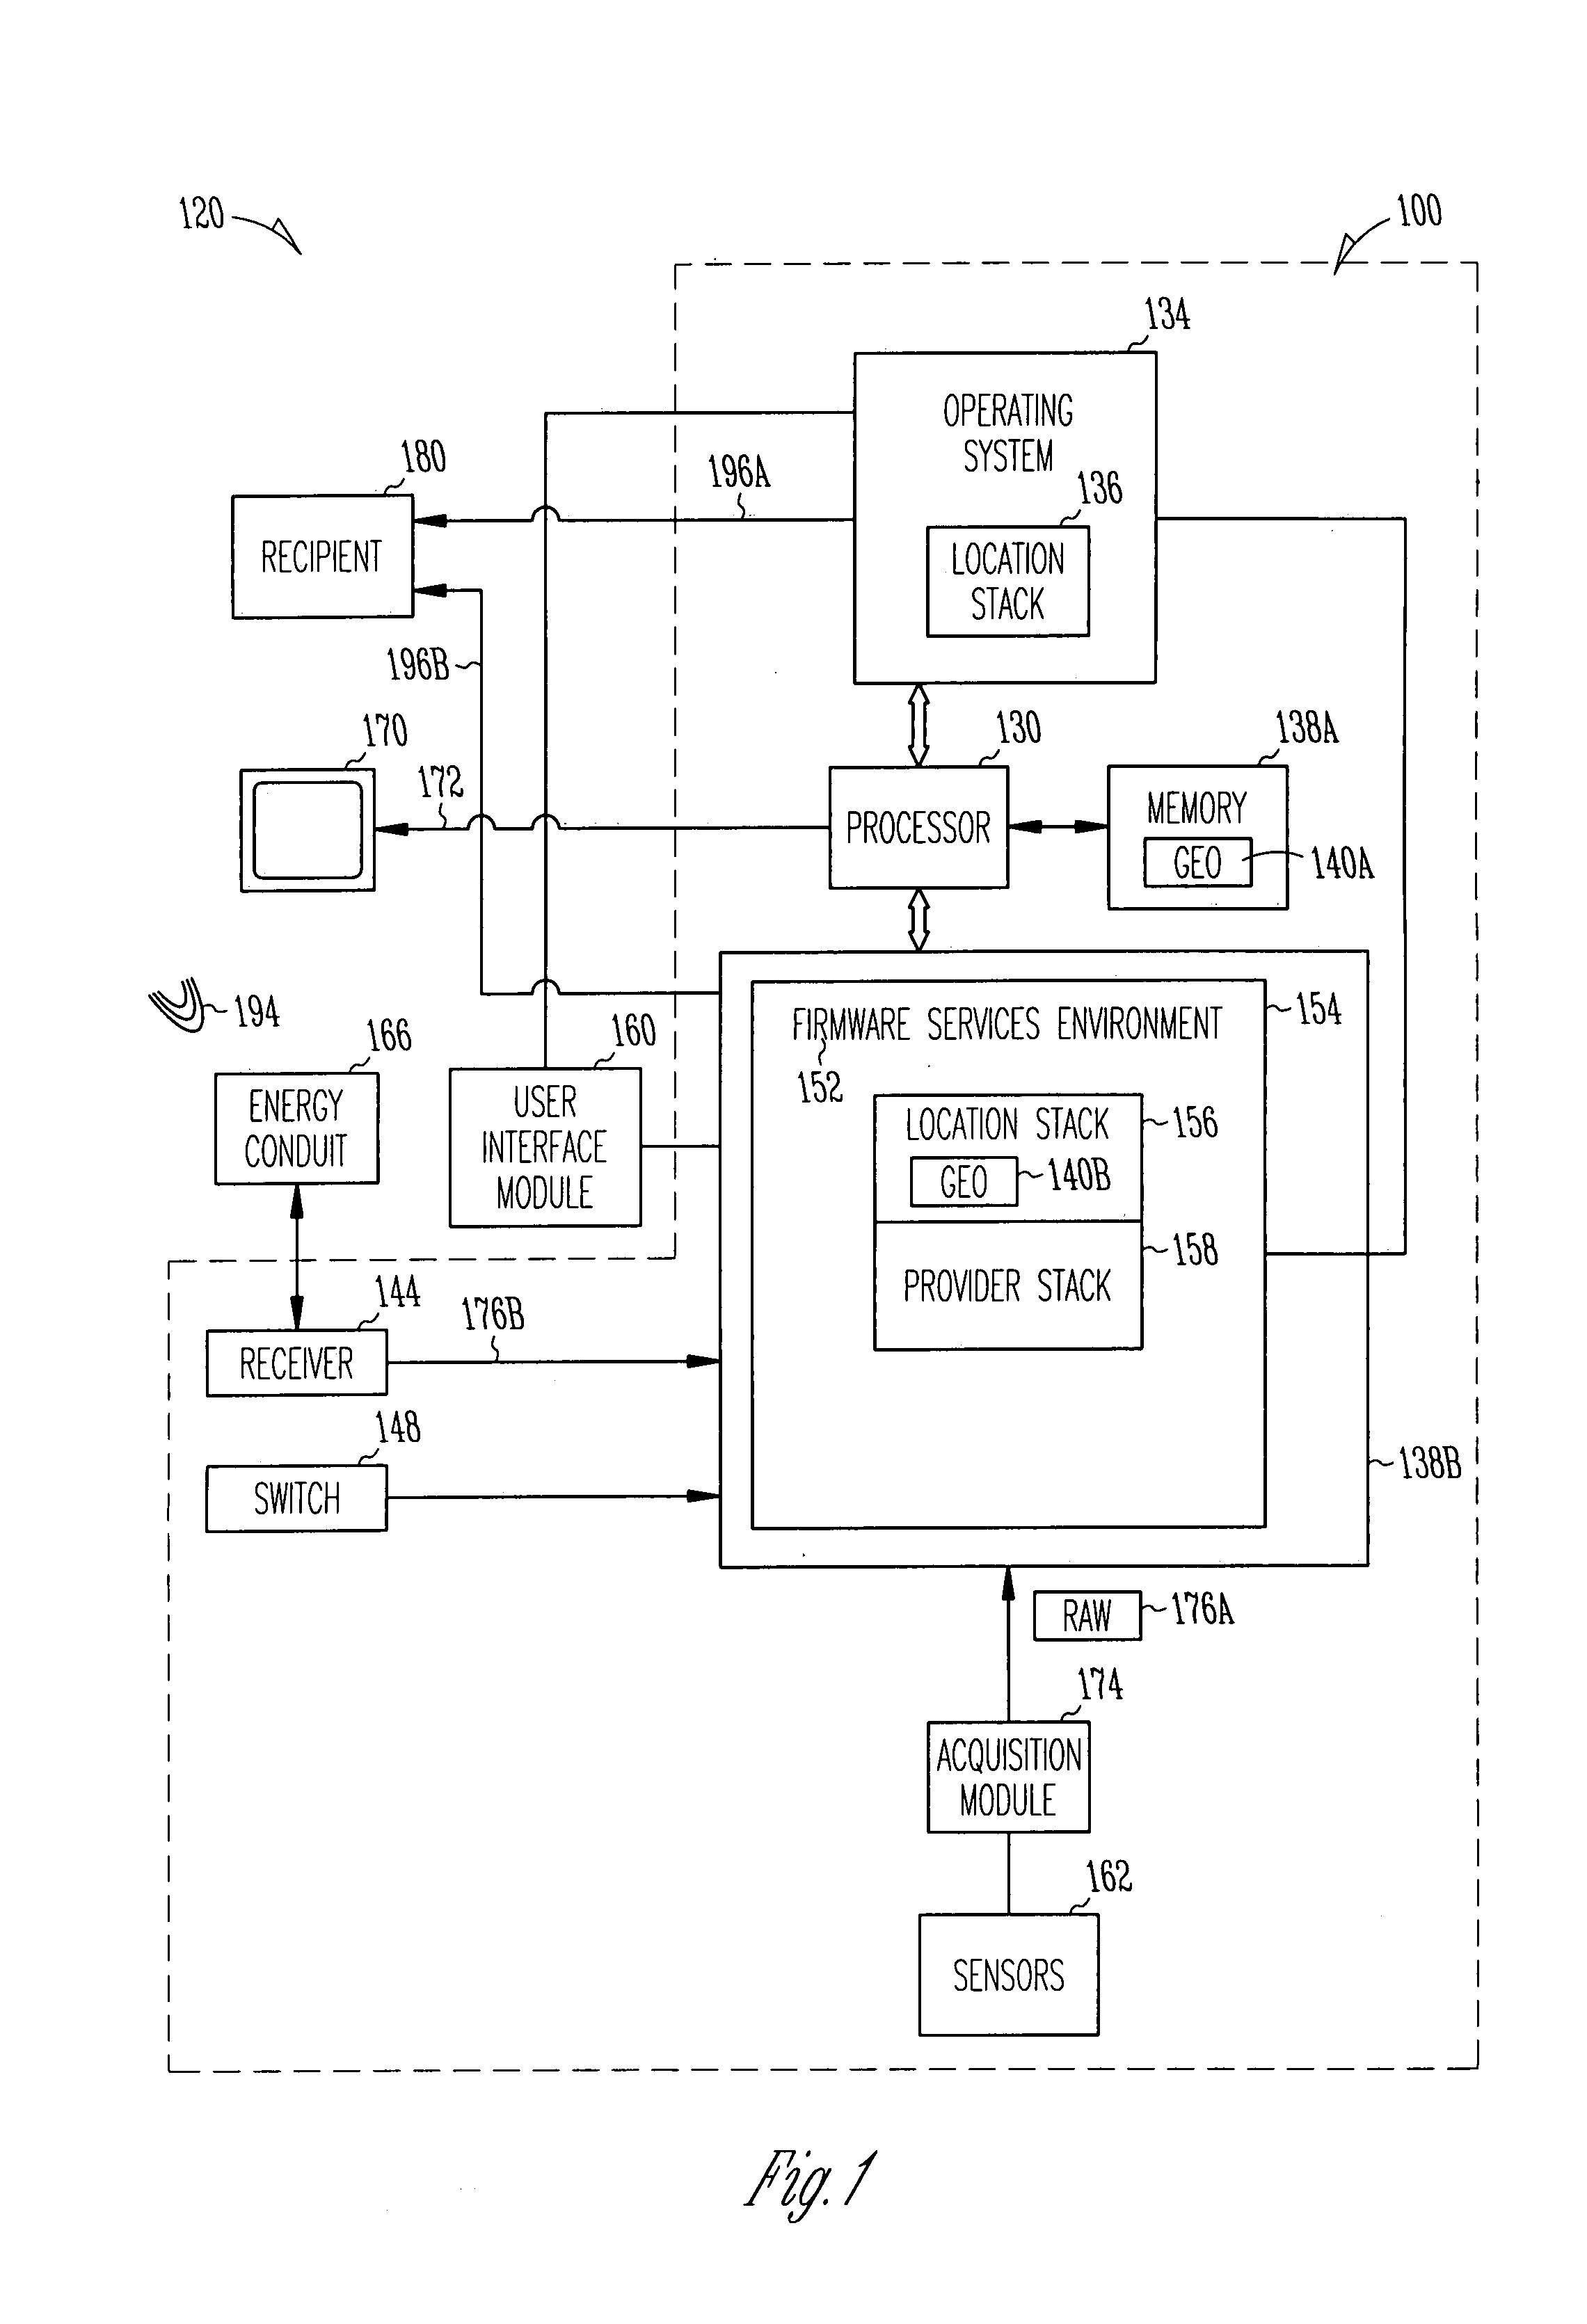 Location processing apparatus, systems, and methods